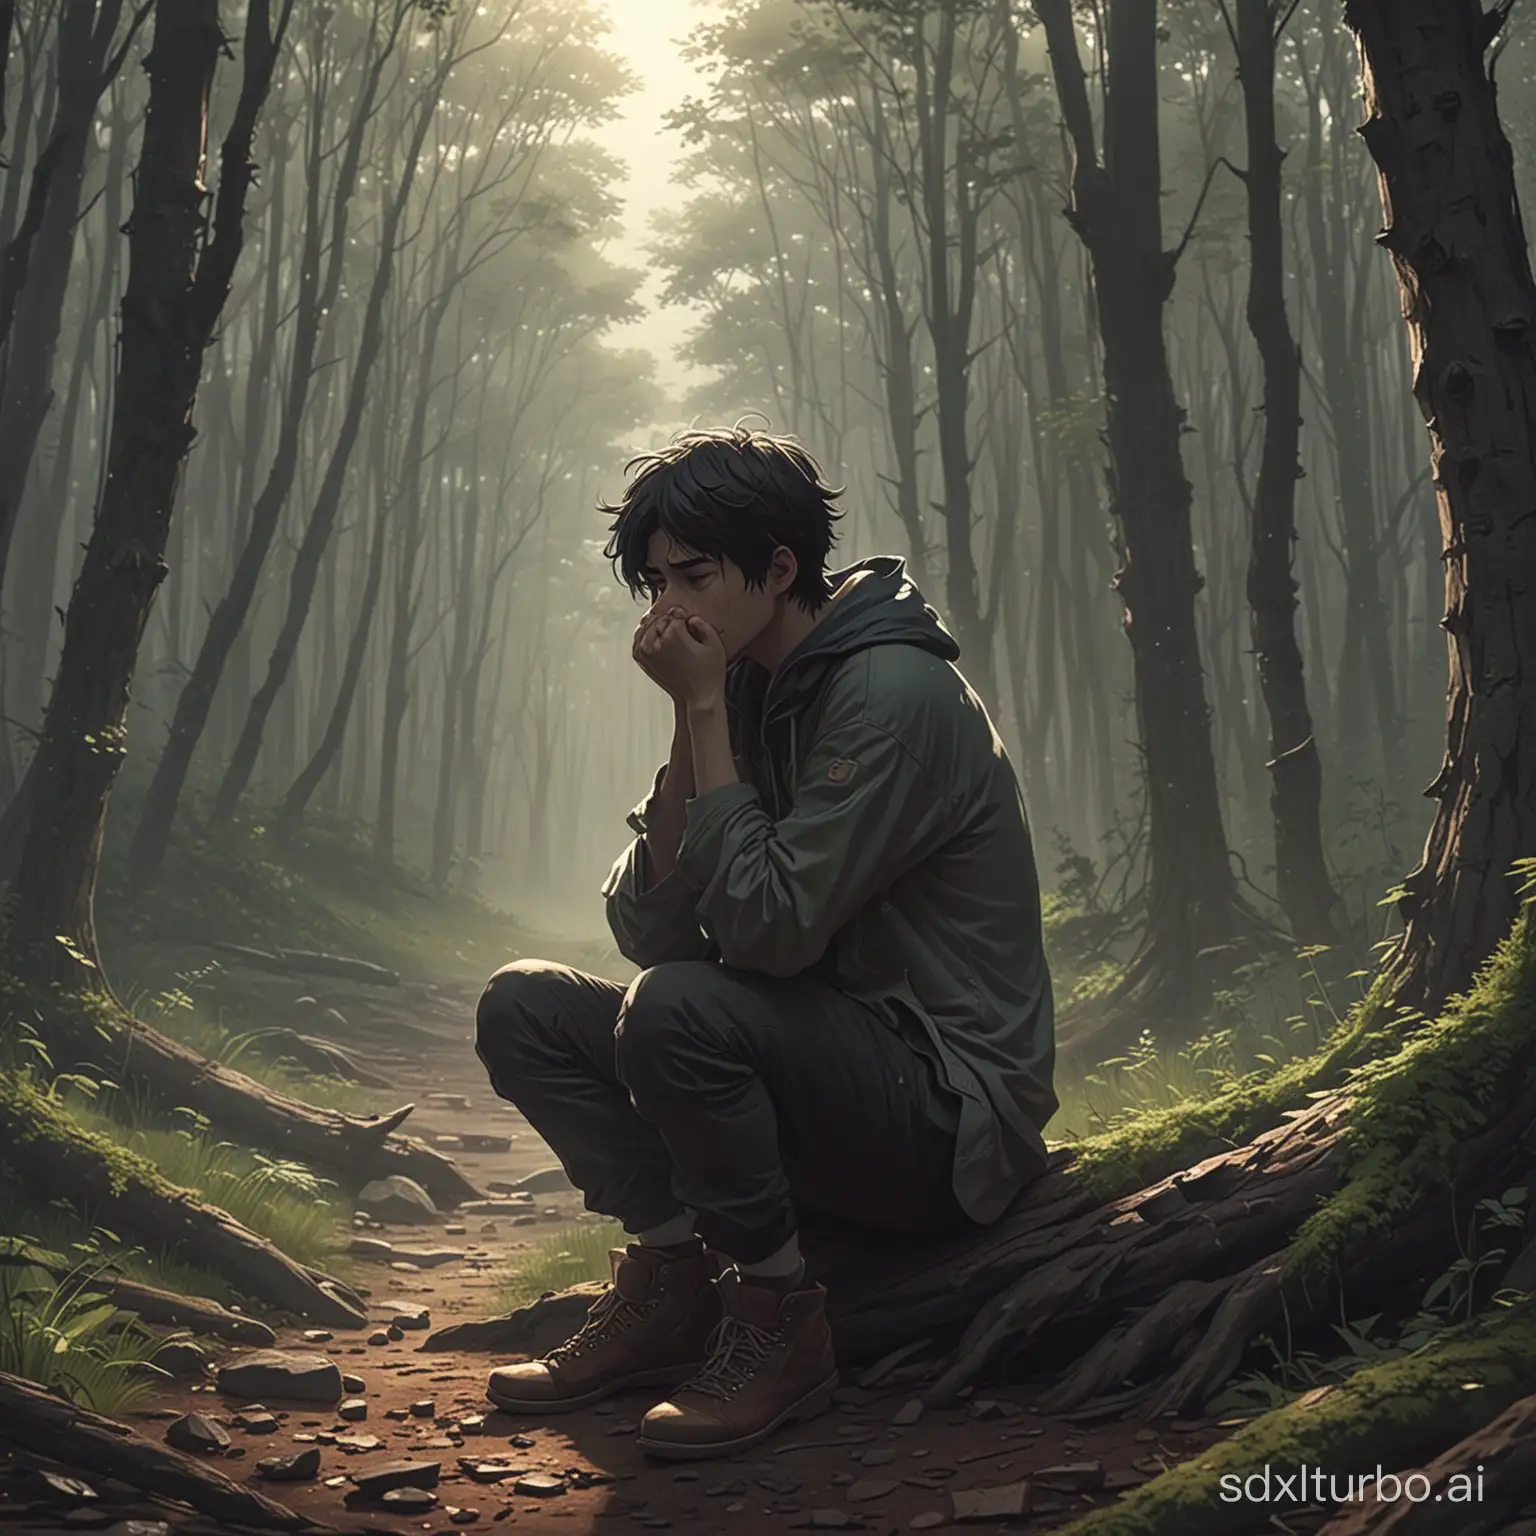 Alone guy in the woods,sitting crying,emotional, dramatic,anime style